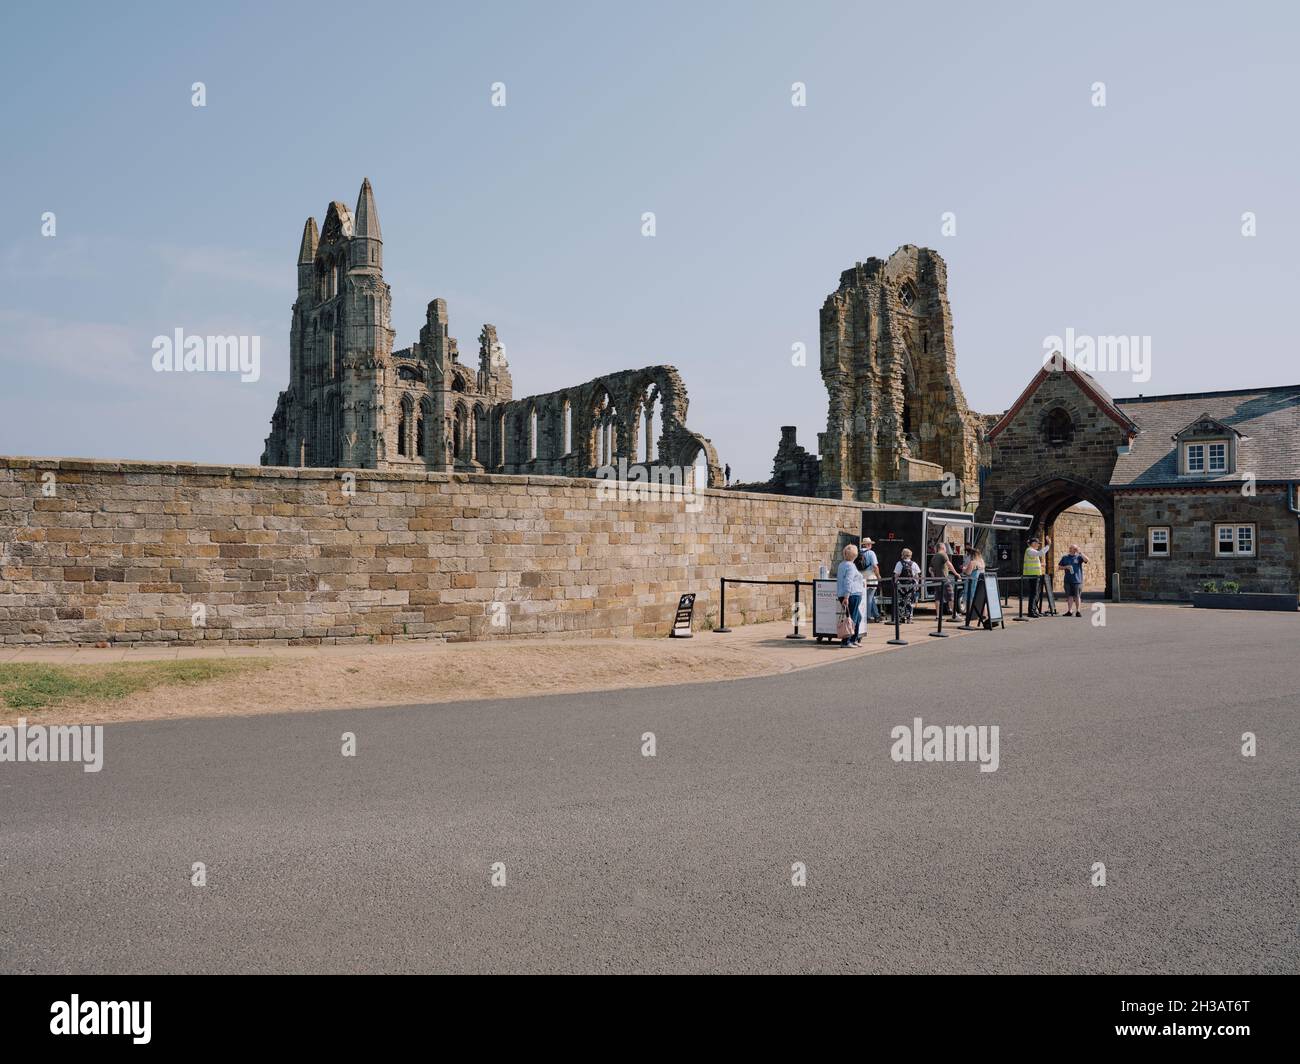 The entrance to the gothic ruins of Whitby Abbey a 7th-century Christian monastery that later became a Benedictine abbey managed by English Heritage Stock Photo